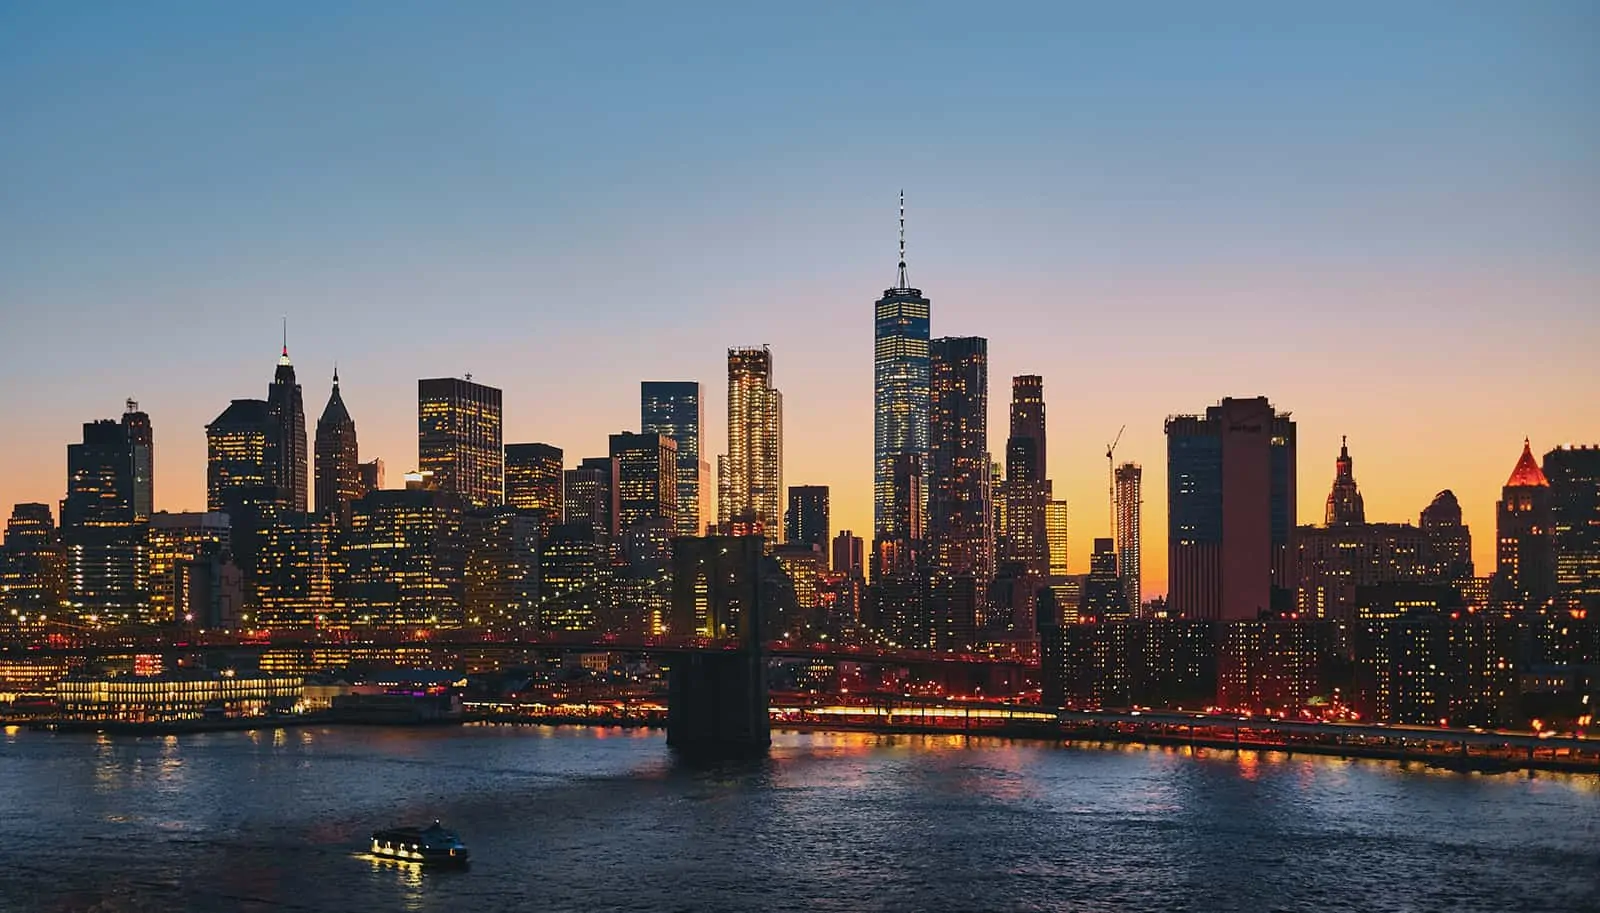 Image of New York City in the evening